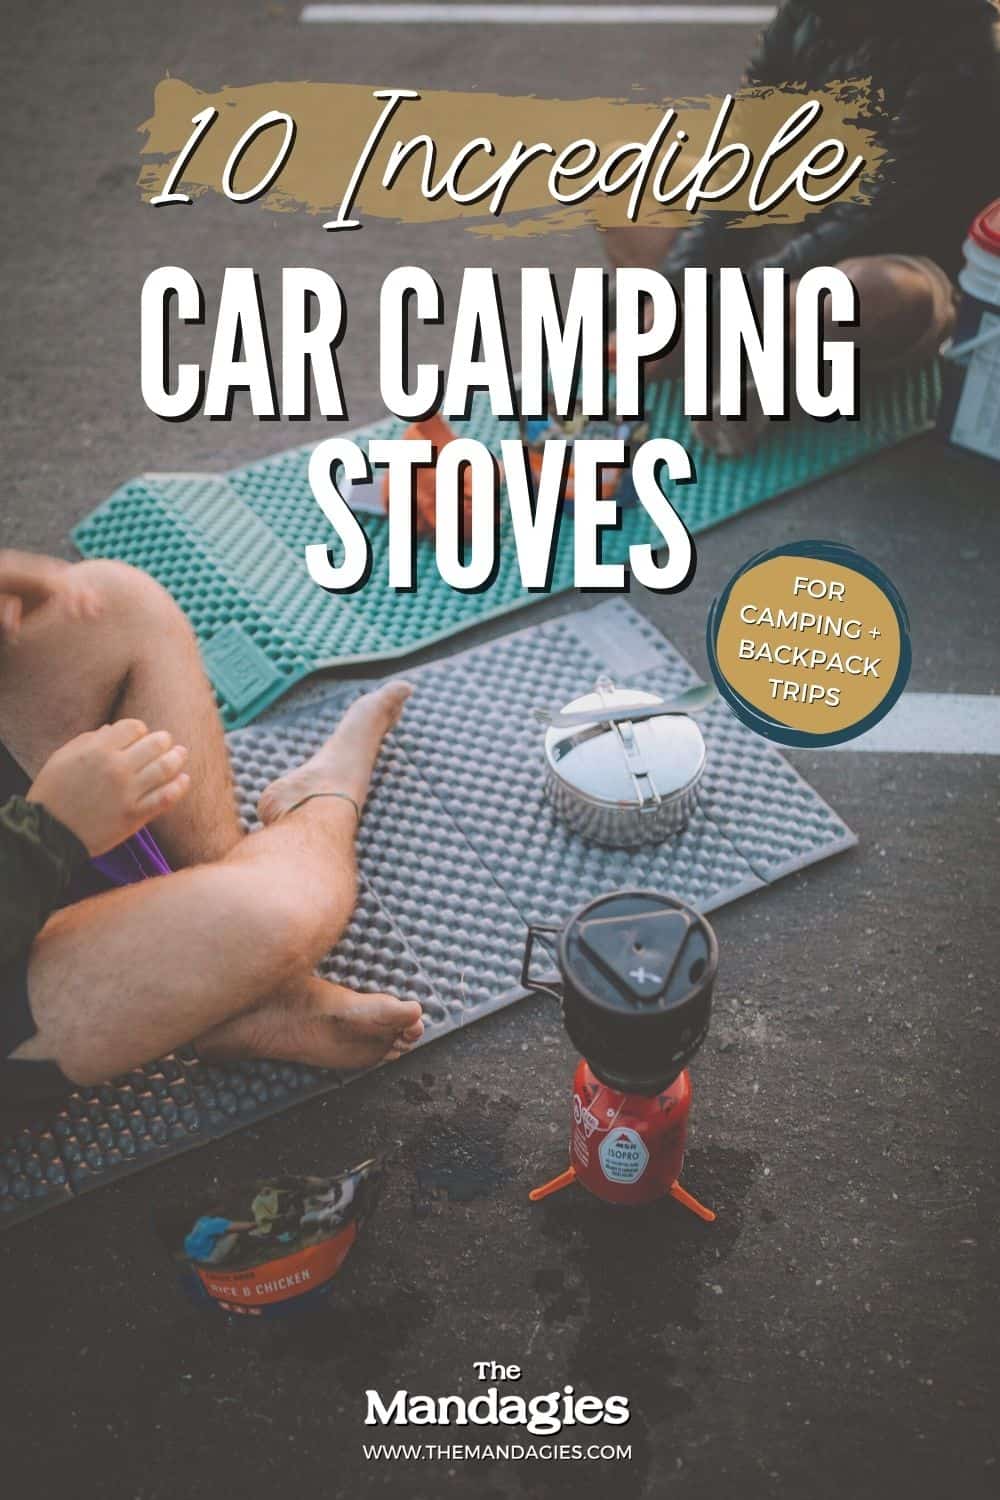 All the Best Camping Stoves For Car Camping and Backpacking #camping #campingreviews #stoves #cooking